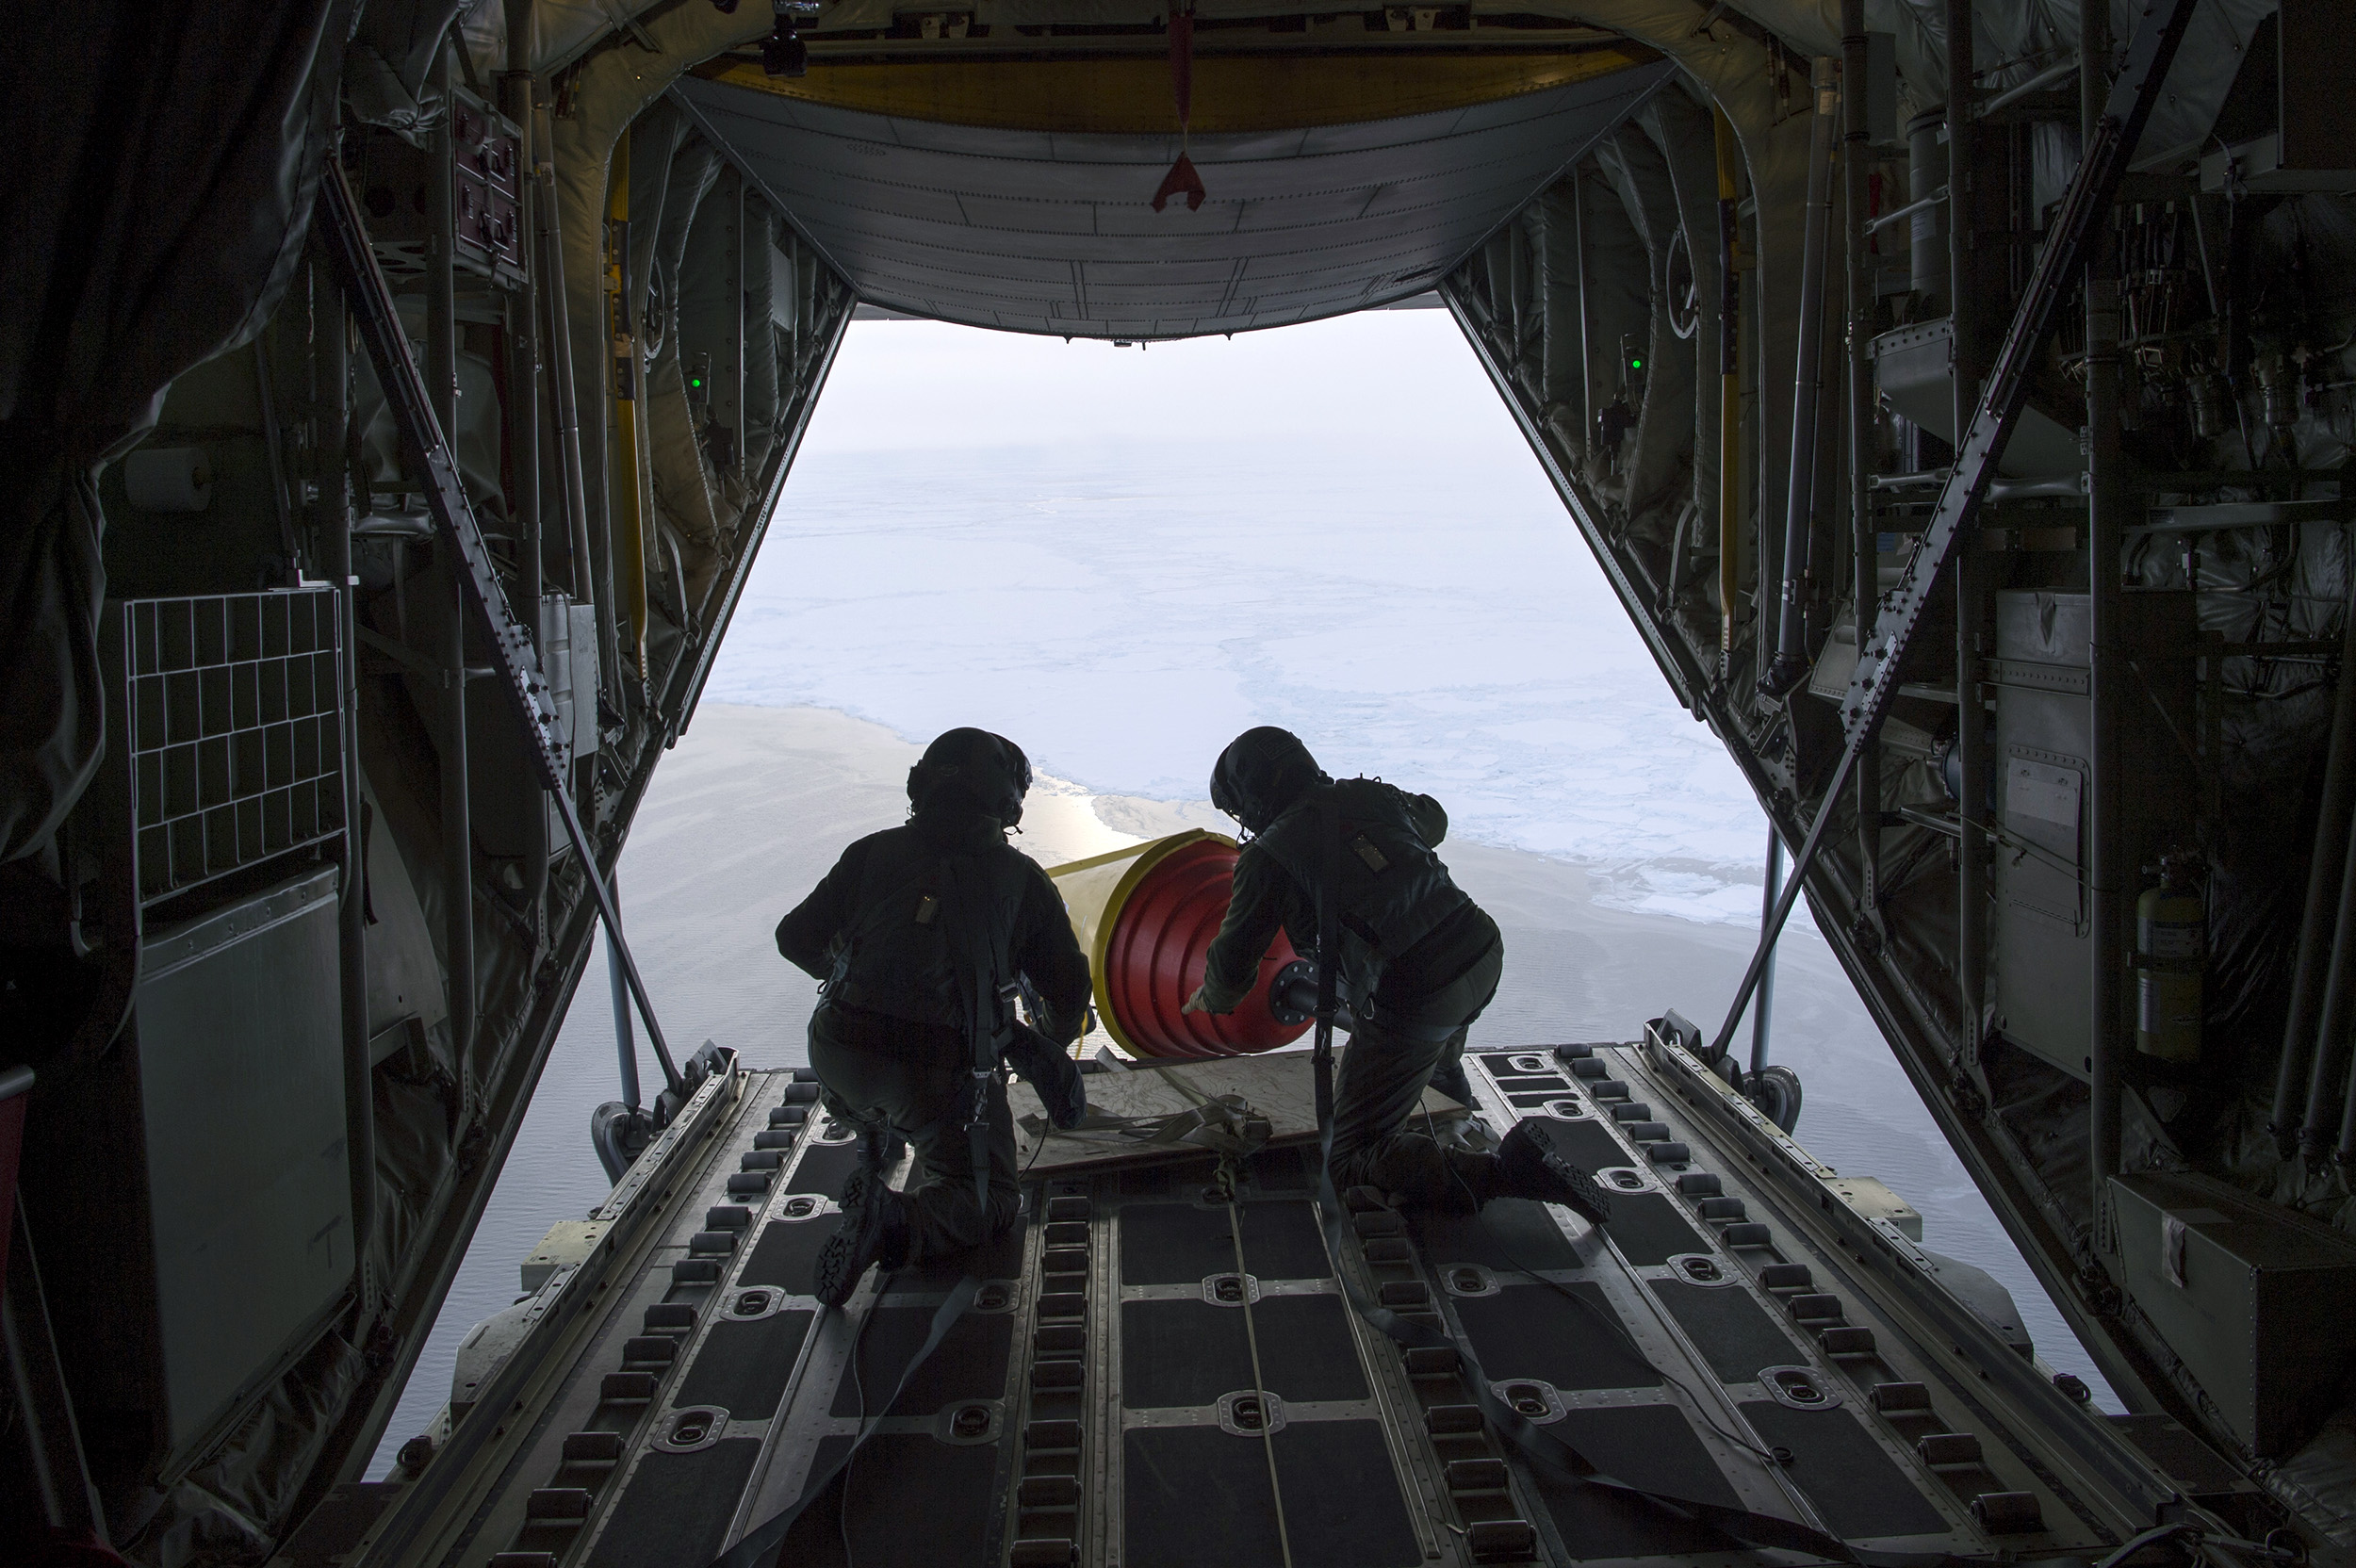   ARCTIC OCEAN  - An Air-Deployable Expendable Ice Buoy (AXIB) is deployed in the high Arctic near the North Pole from a Royal Danish Air Force C-130 aircraft operating out of Thule Air Force Base in Greenland, as part of the International Arctic Buo